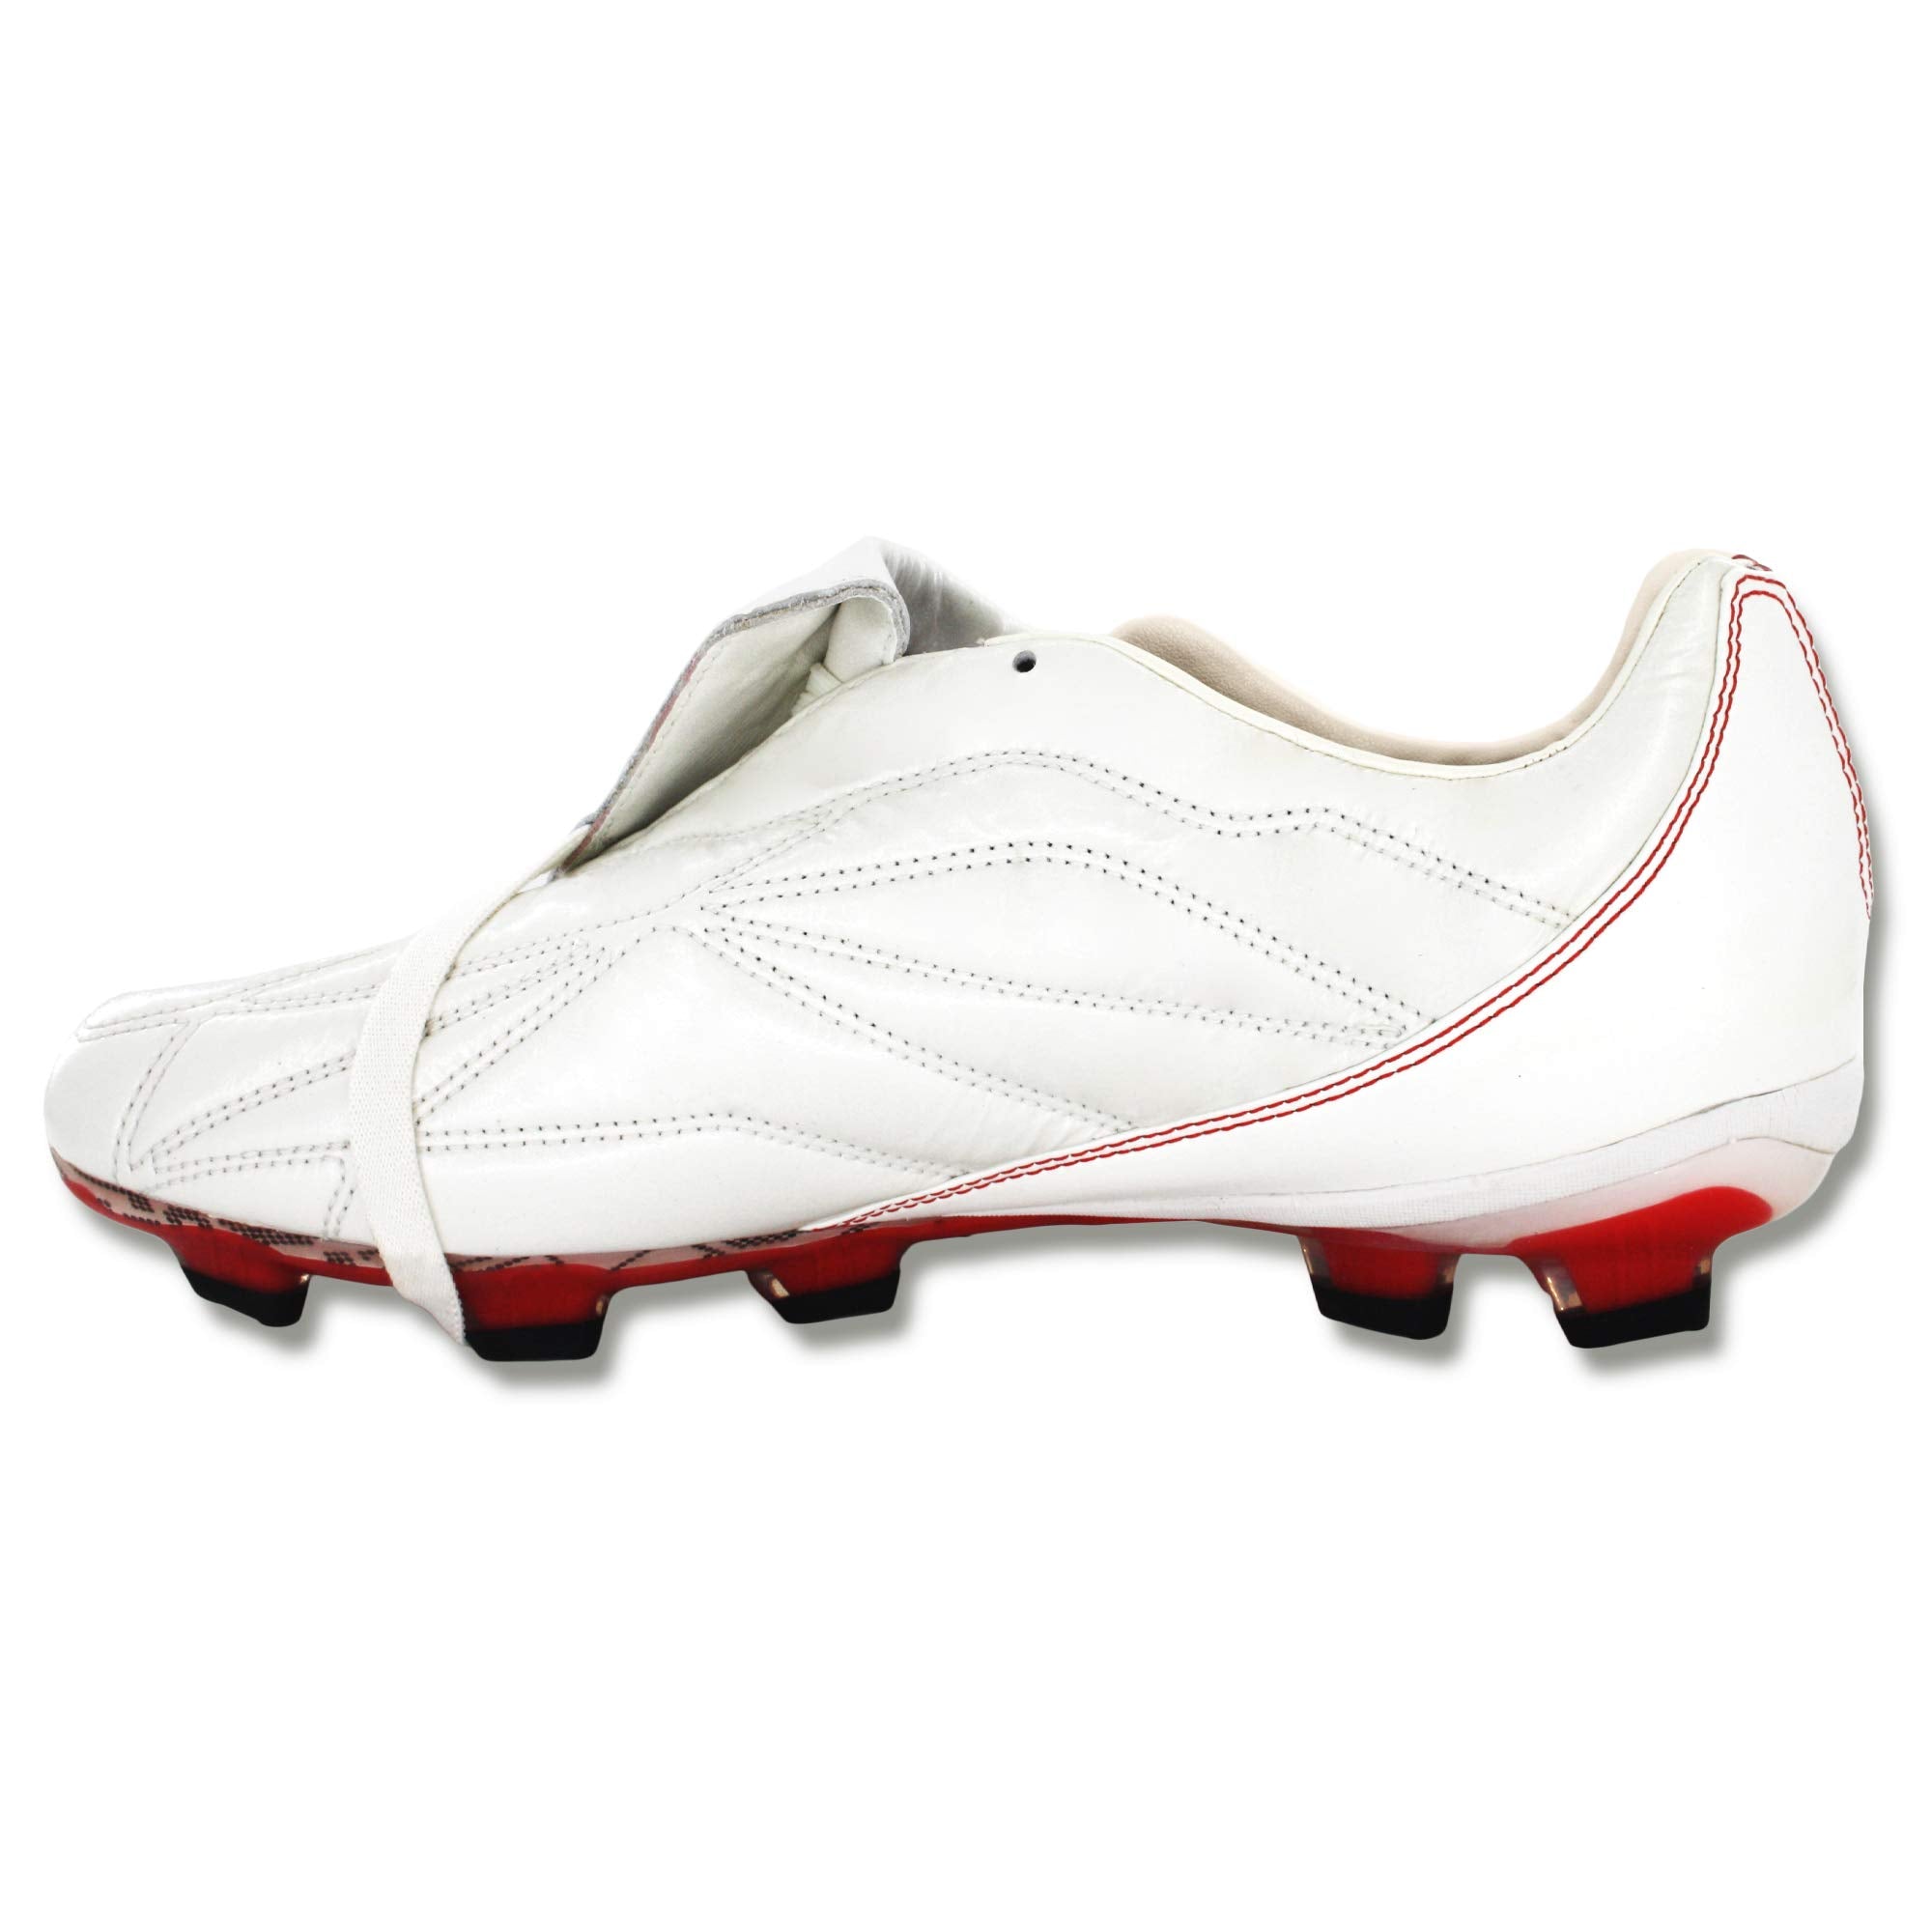 Pele Sports Men's Football Boots 1962 FG MS - White / Red